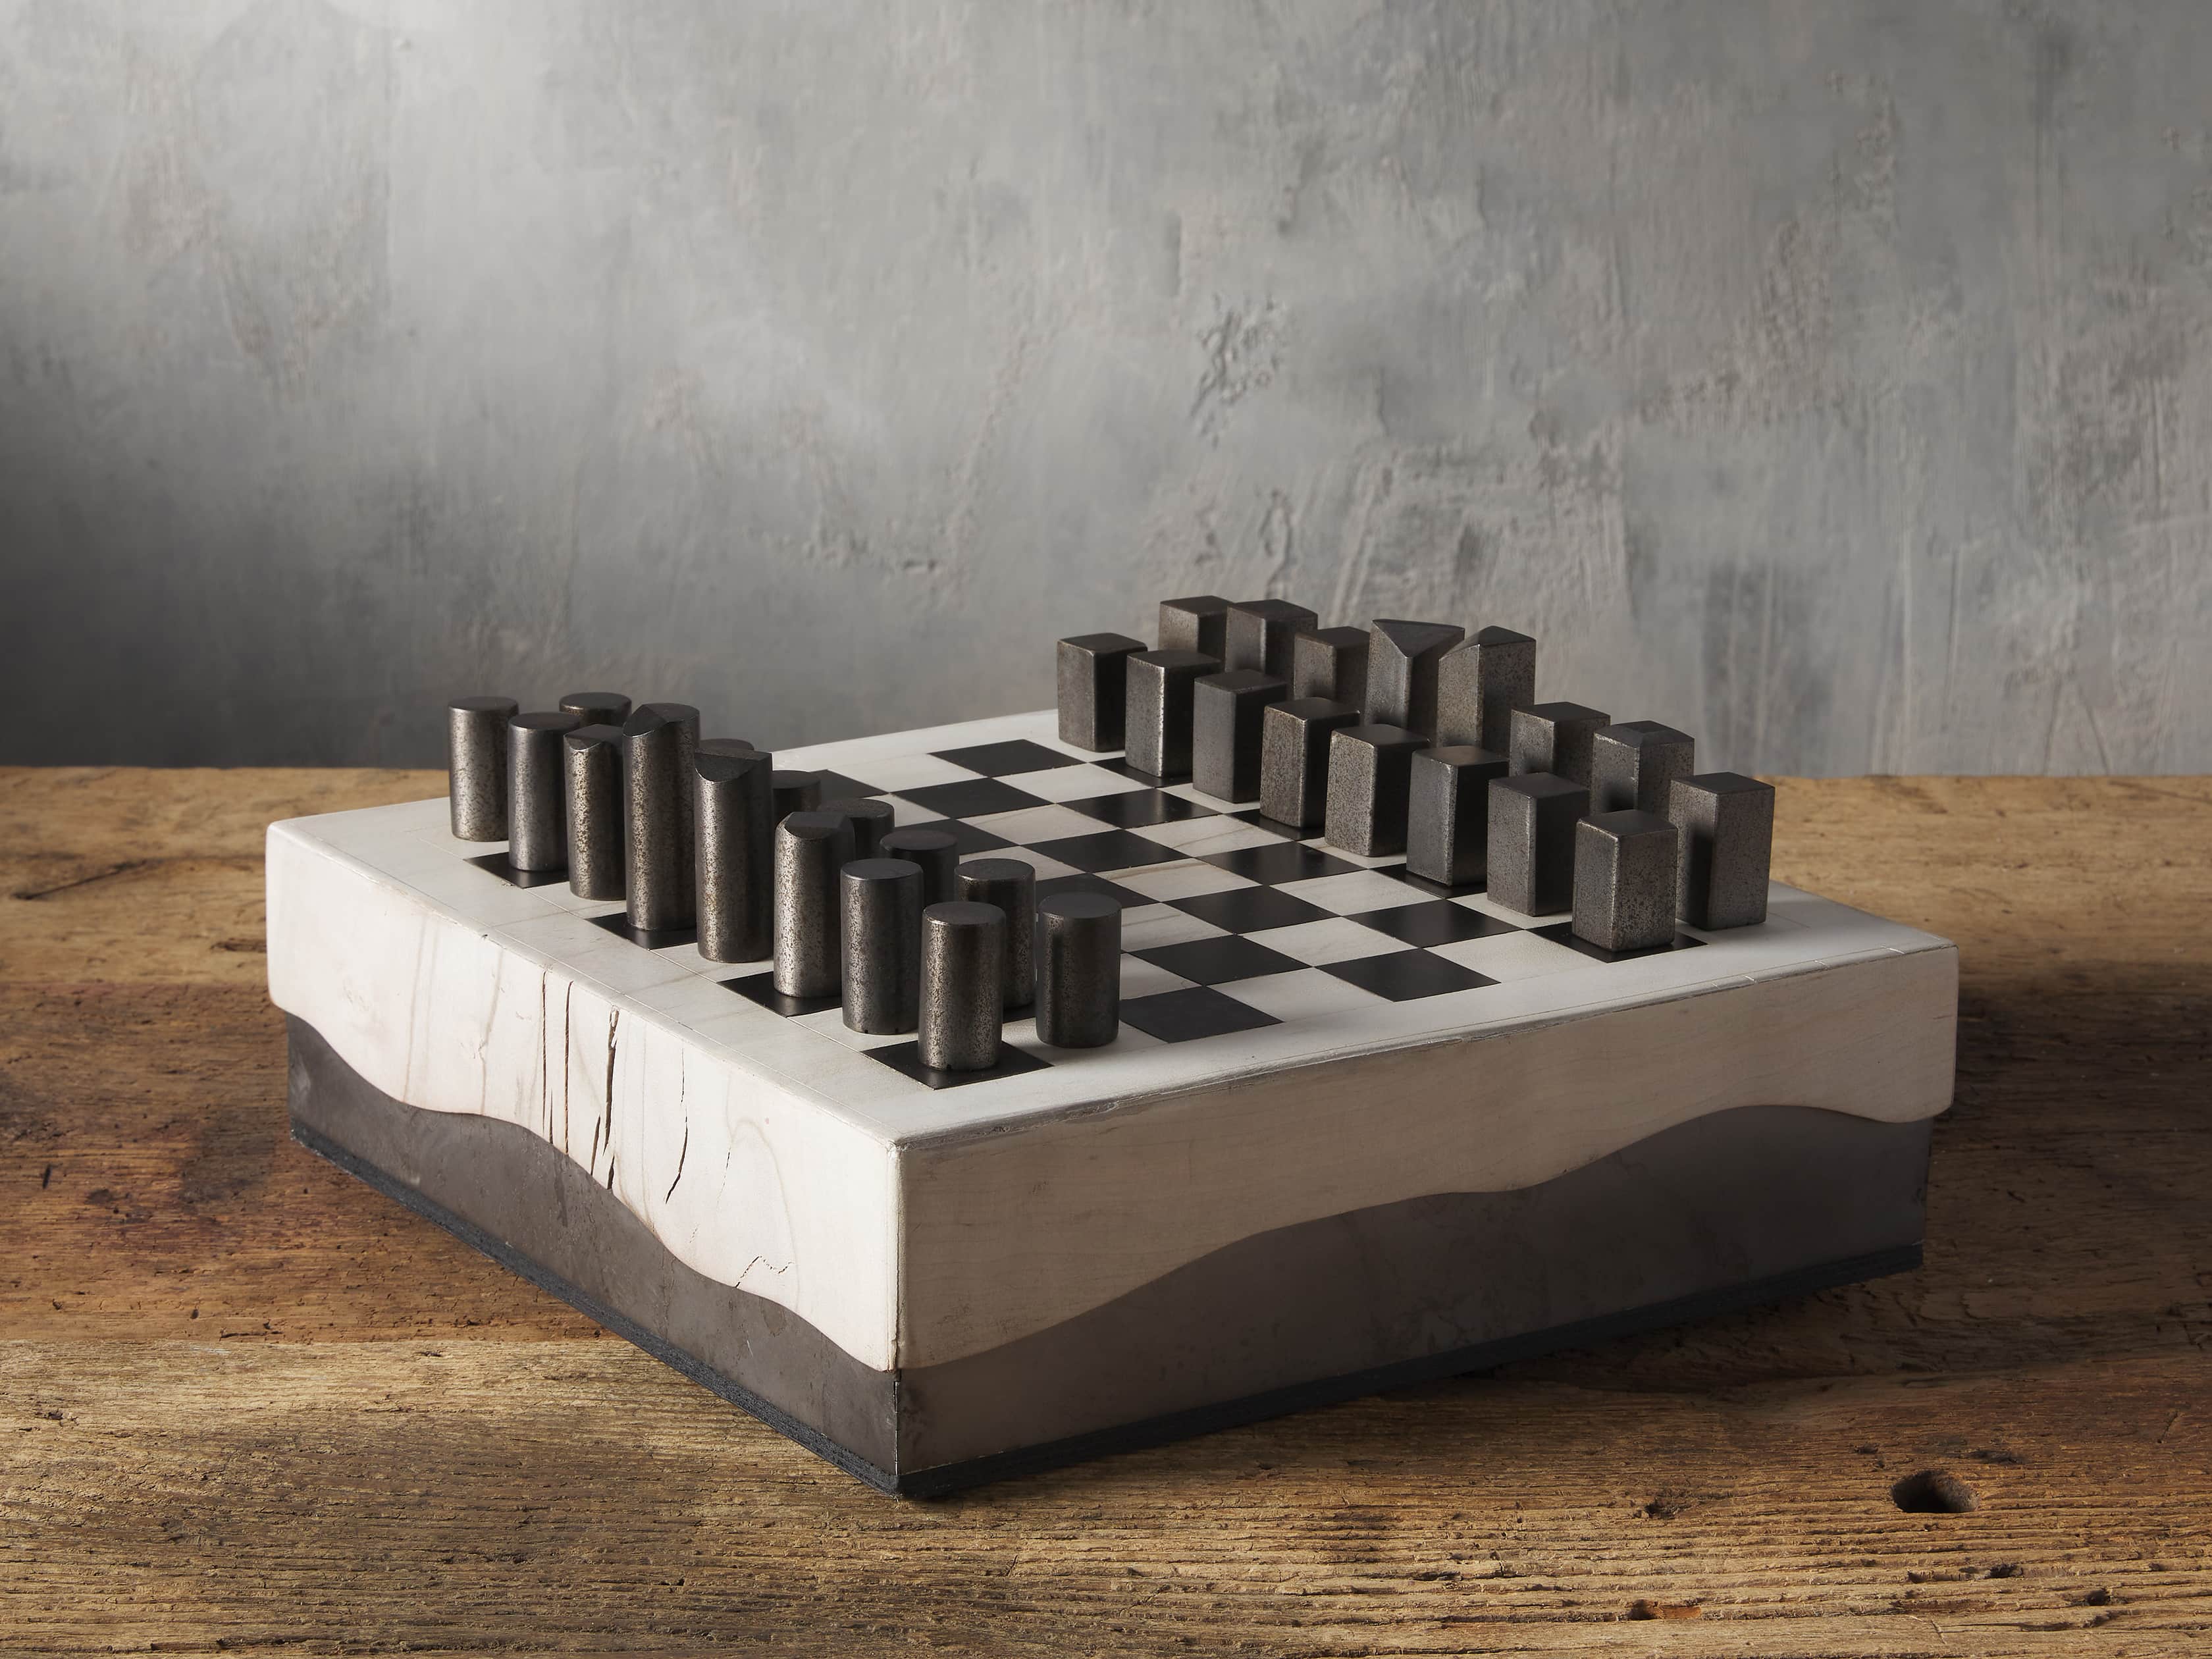 Unique Chess Boards - Wooden, Marble, Electronic, Vertical and more.